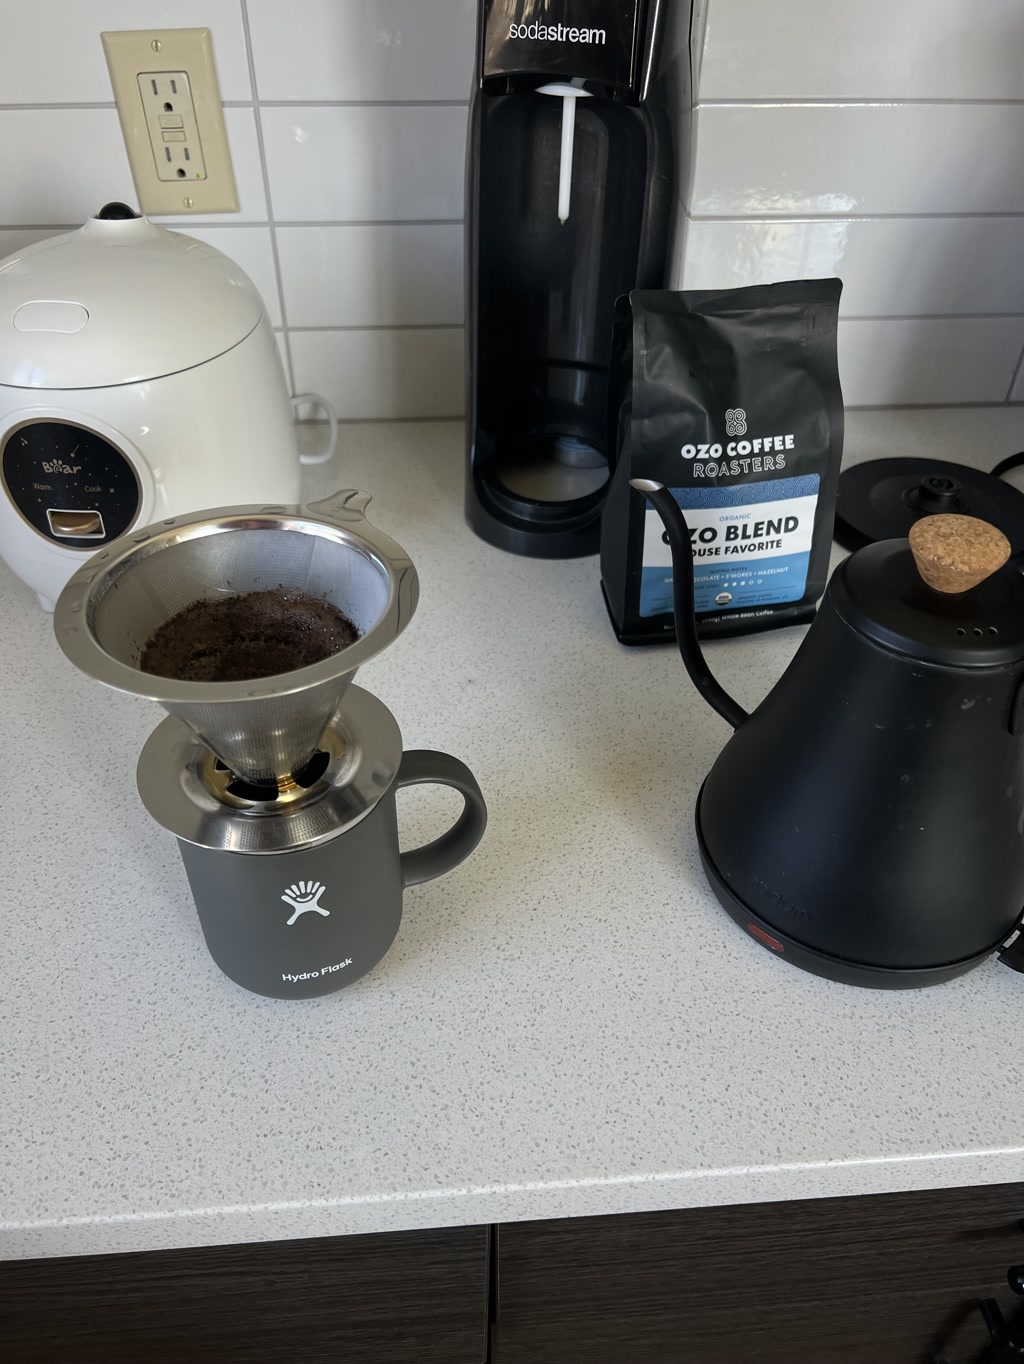 A kitchen countertop holding a variety of items used for making and serving coffee. On the left, there is a white rice cooker with a visible interface showing cooking options. In the middle, a SodaStream device stands next to a bag of coffee from OZO Coffee Roasters, advertising their 'OZO Blend' which is labeled as a 'House Favorite'. To the right, there is a kettle and in front is a Hydro Flask brand coffee mug with a metallic pour-over coffee dripper placed on top, filled with ground coffee.